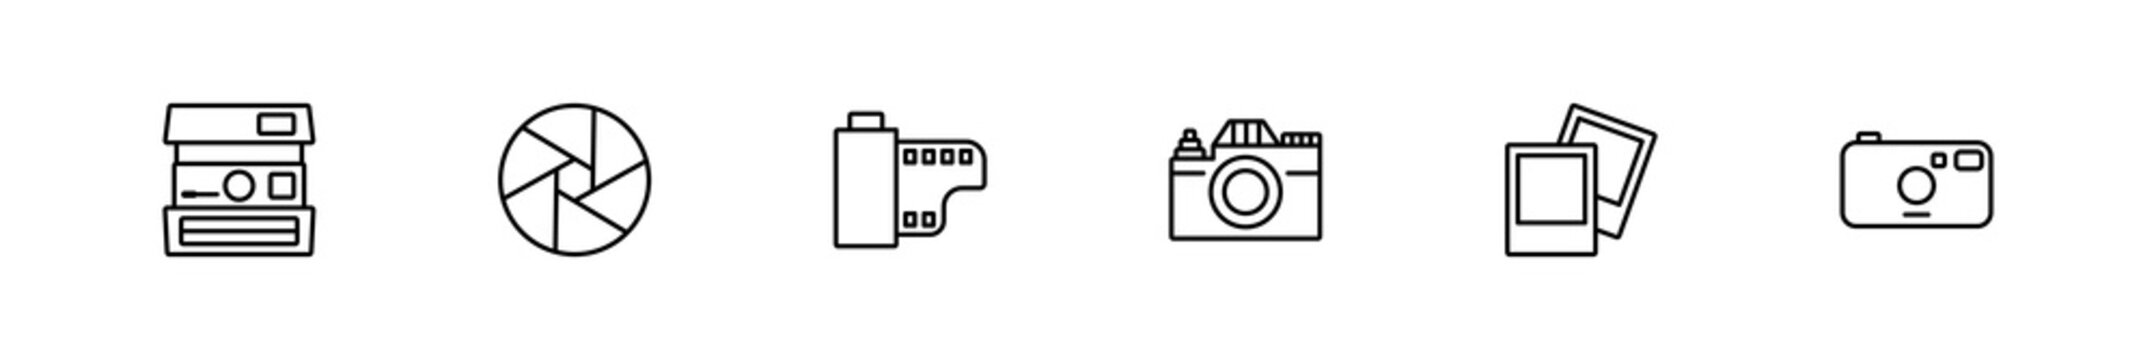 Set of vector icons on theme of photography. For web design and applications. Vector sign in simple style isolated on white background